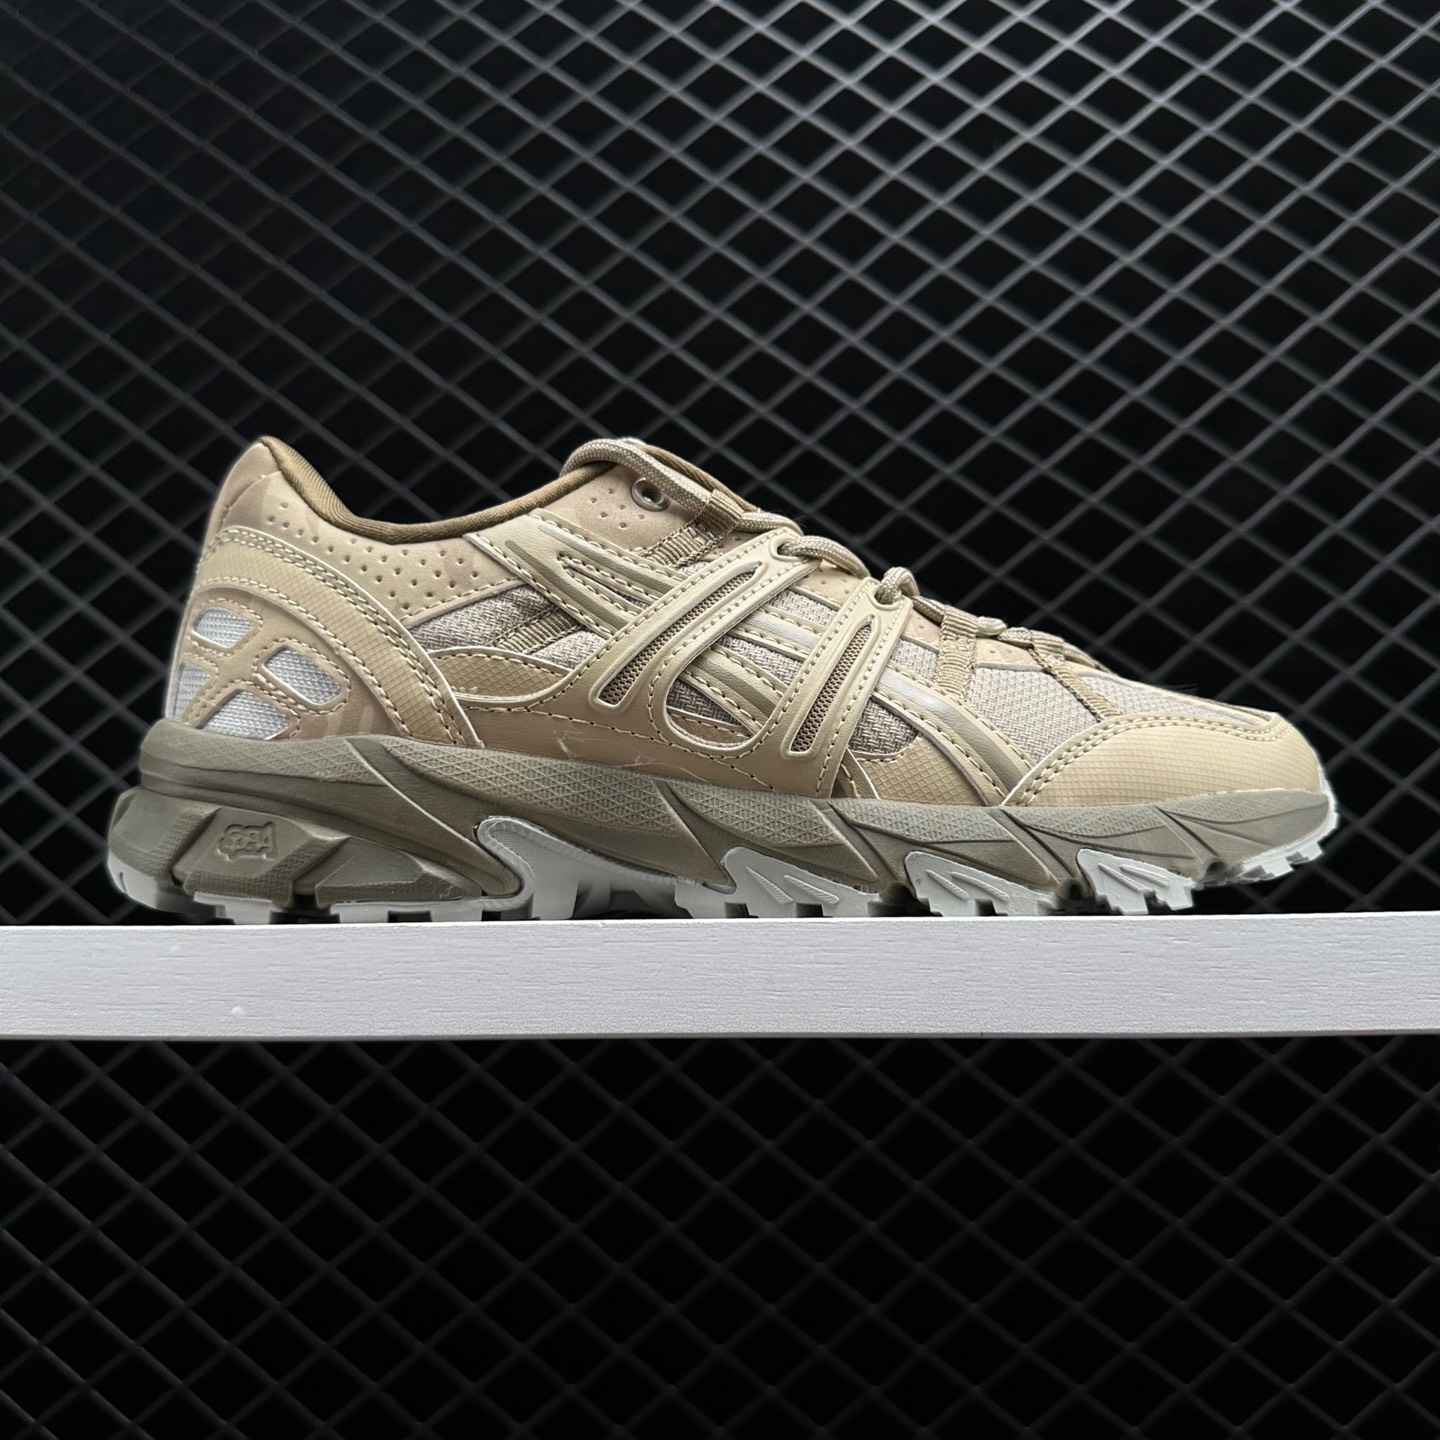 Asics Gel Sonoma 15-50 'Wood Crepe' 1201A688-021 - Durable and Stylish Outdoor Shoes